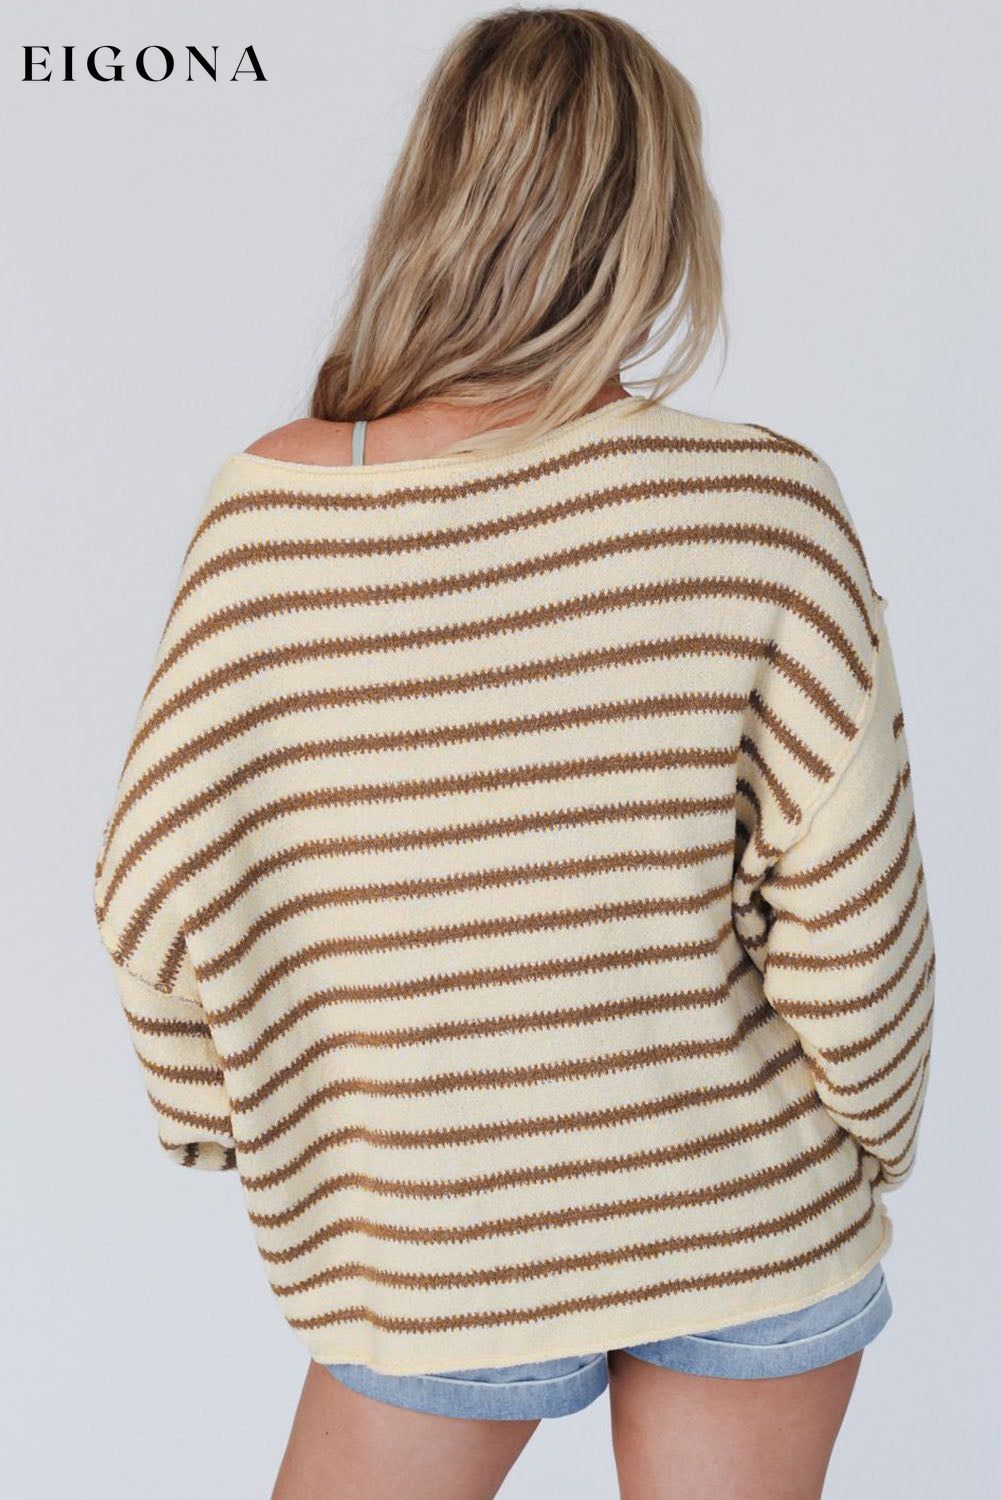 Boat Neck Long Sleeve Fashion Striped Sweater clothes long sleeve Ship From Overseas sweater sweaters sweatshirt SYNZ top